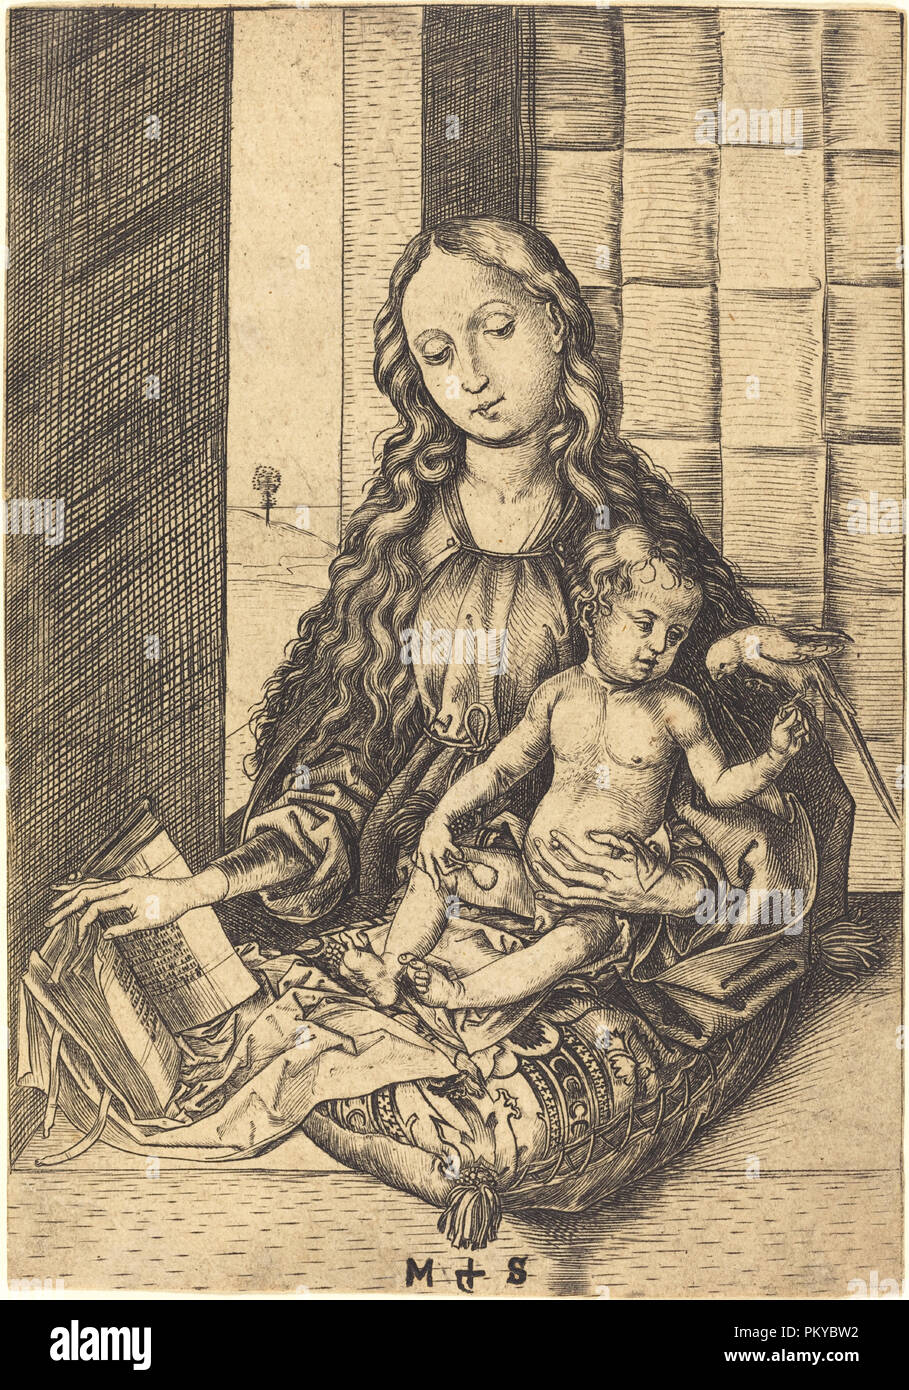 Madonna with a Parrot. Dated: c. 1470/1475. Medium: engraving. Museum: National Gallery of Art, Washington DC. Author: Martin Schongauer. Stock Photo